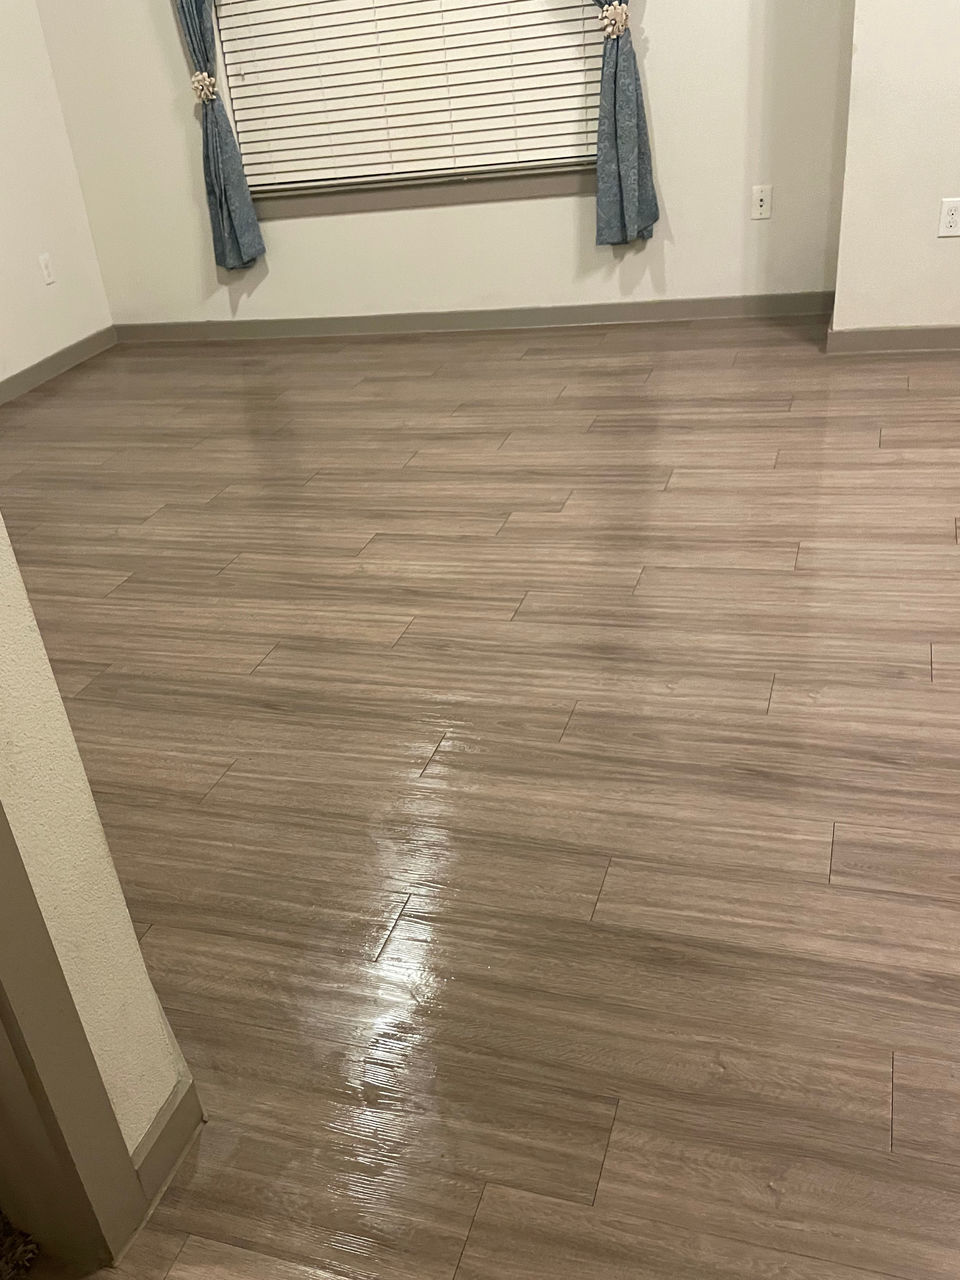 flooring, hardwood floor, hardwood, home interior, floor, indoors, wood flooring, laminate flooring, wood, parquet floor, architecture, wood laminate flooring, no people, home improvement, domestic room, diy, built structure, apartment, building, lifestyles, home ownership, door, entrance, wall - building feature